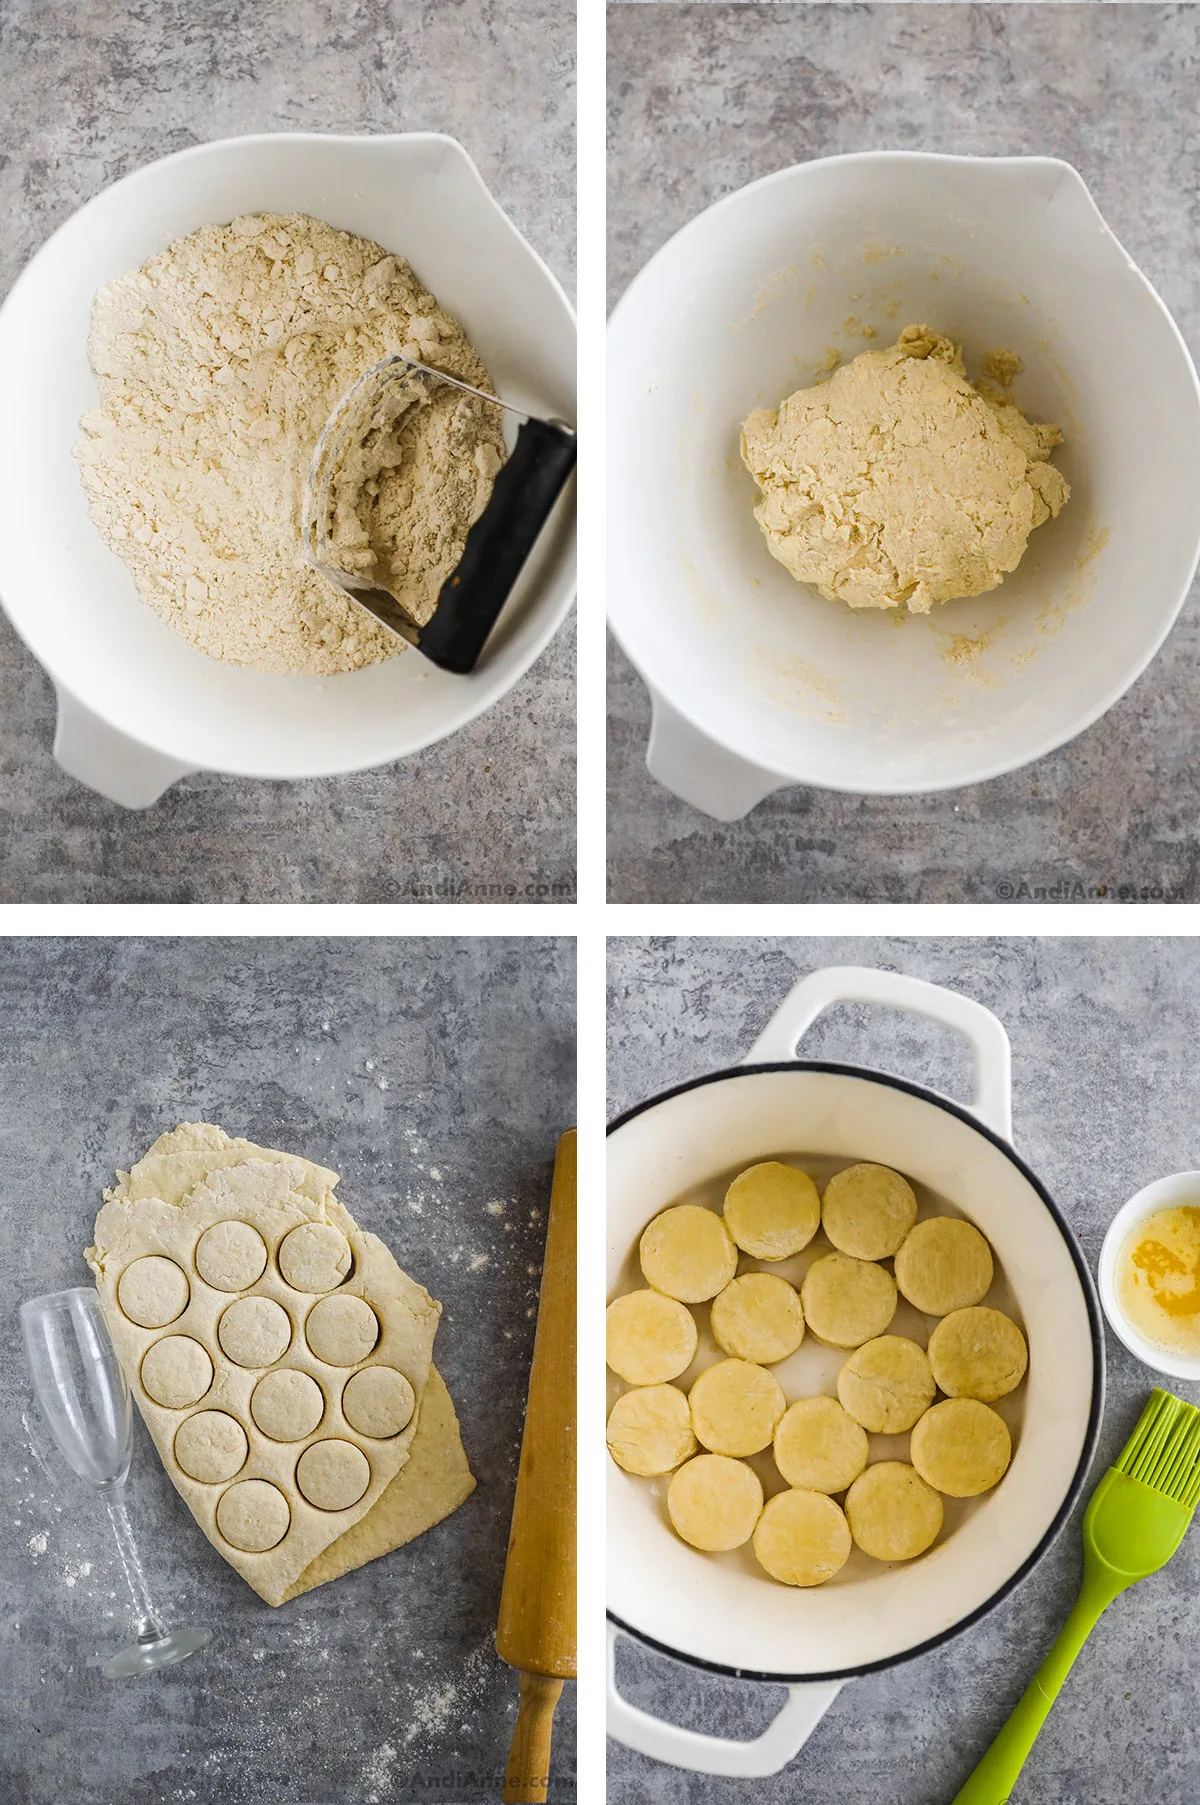 Four images showing steps to make recipe. First two are have a white bowl, first with flour and pastry cutter, second with ball of dough. Third is dough with circles cut in. Fourth is biscuits in a baking dish.